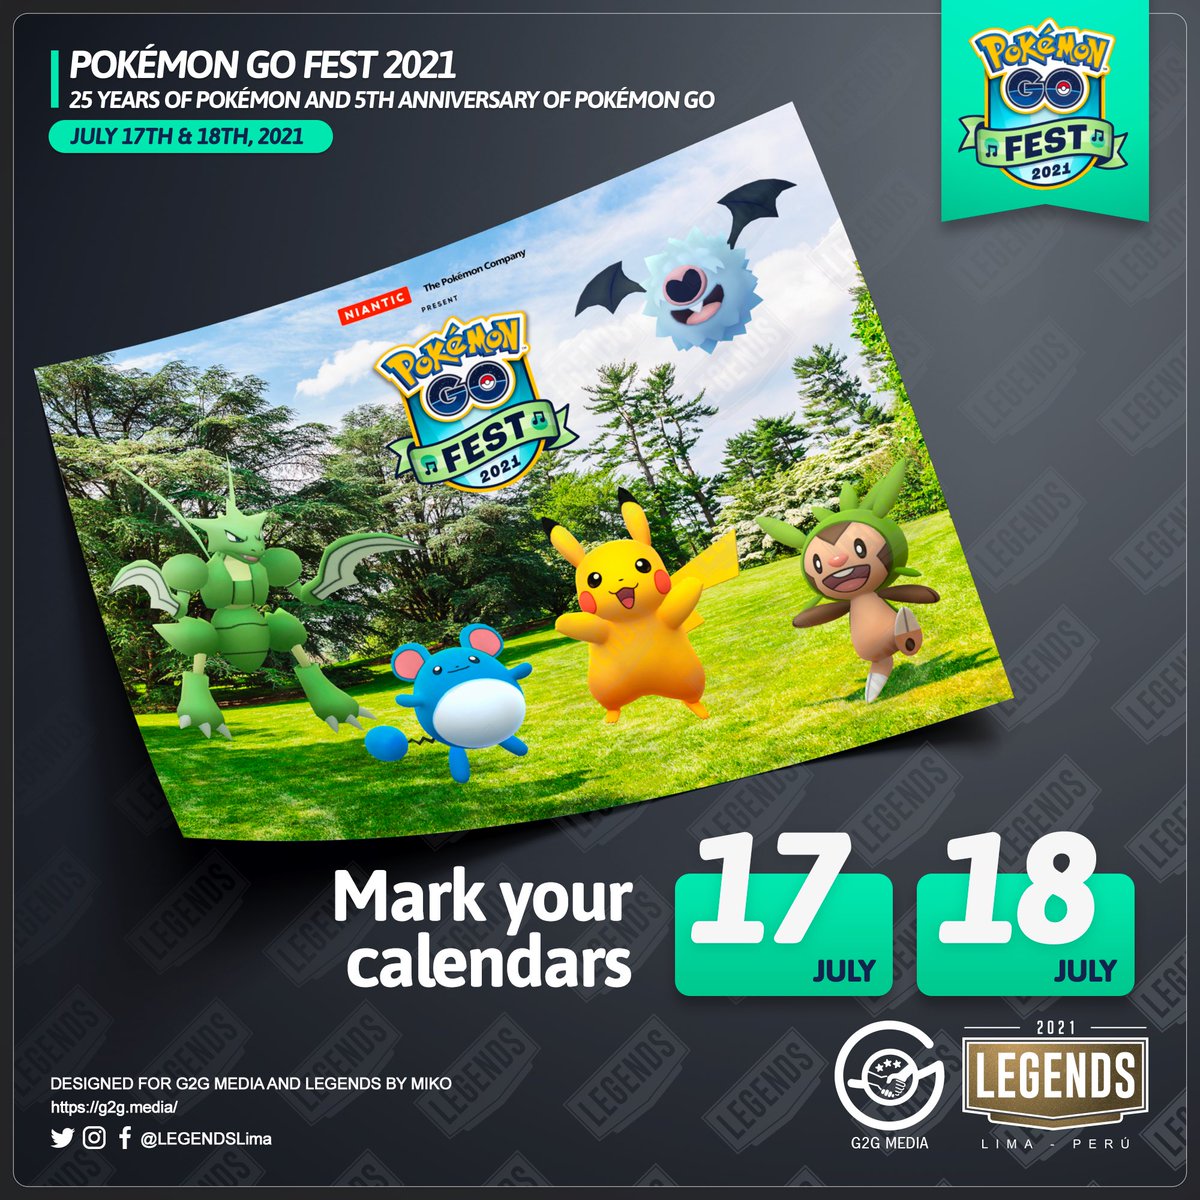 G2gmedia Niantic Has Just Announced The Dates For Pokemon Go Fest 21 Mark Your Calendars As It Will Be A 2 Day Global Event On July 17 18 Full Event